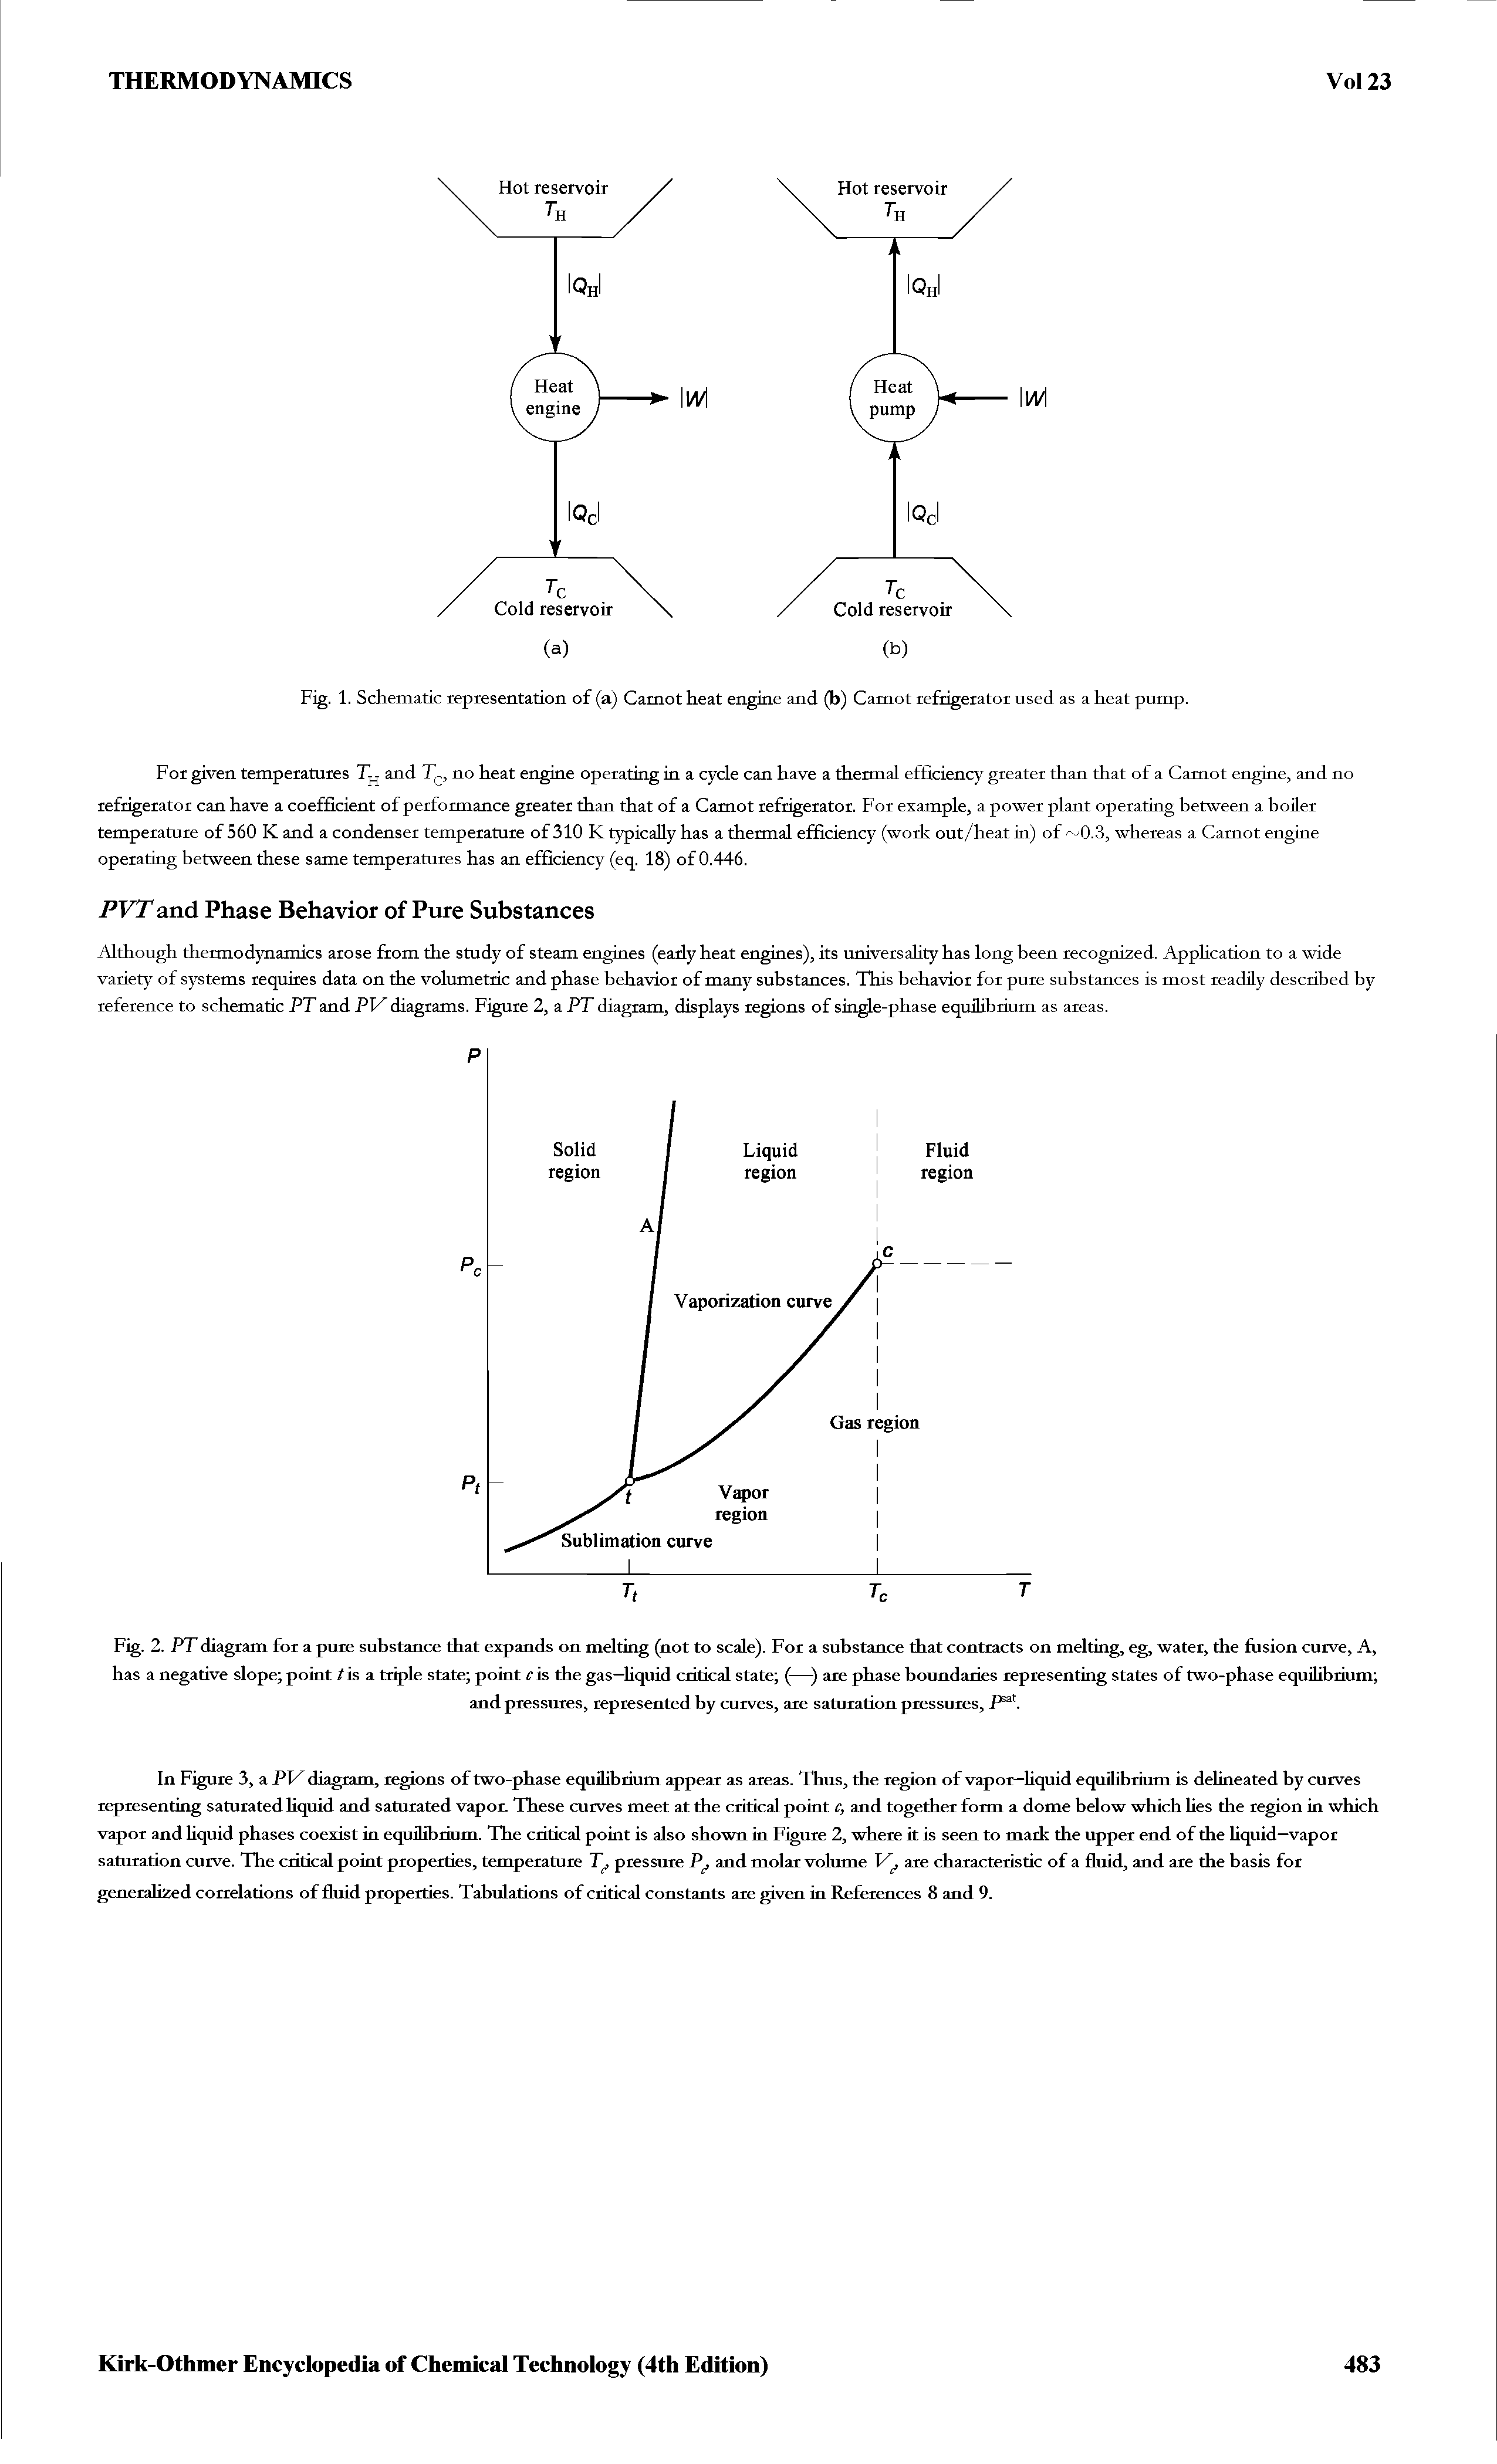 Fig. 2. PT diagram for a pure substance that expands on melting (not to scale). For a substance that contracts on melting, eg, water, the fusion curve, A, has a negative slope point /is a triple state point is the gas—liquid critical state (—) are phase boundaries representing states of two-phase equilibrium ...